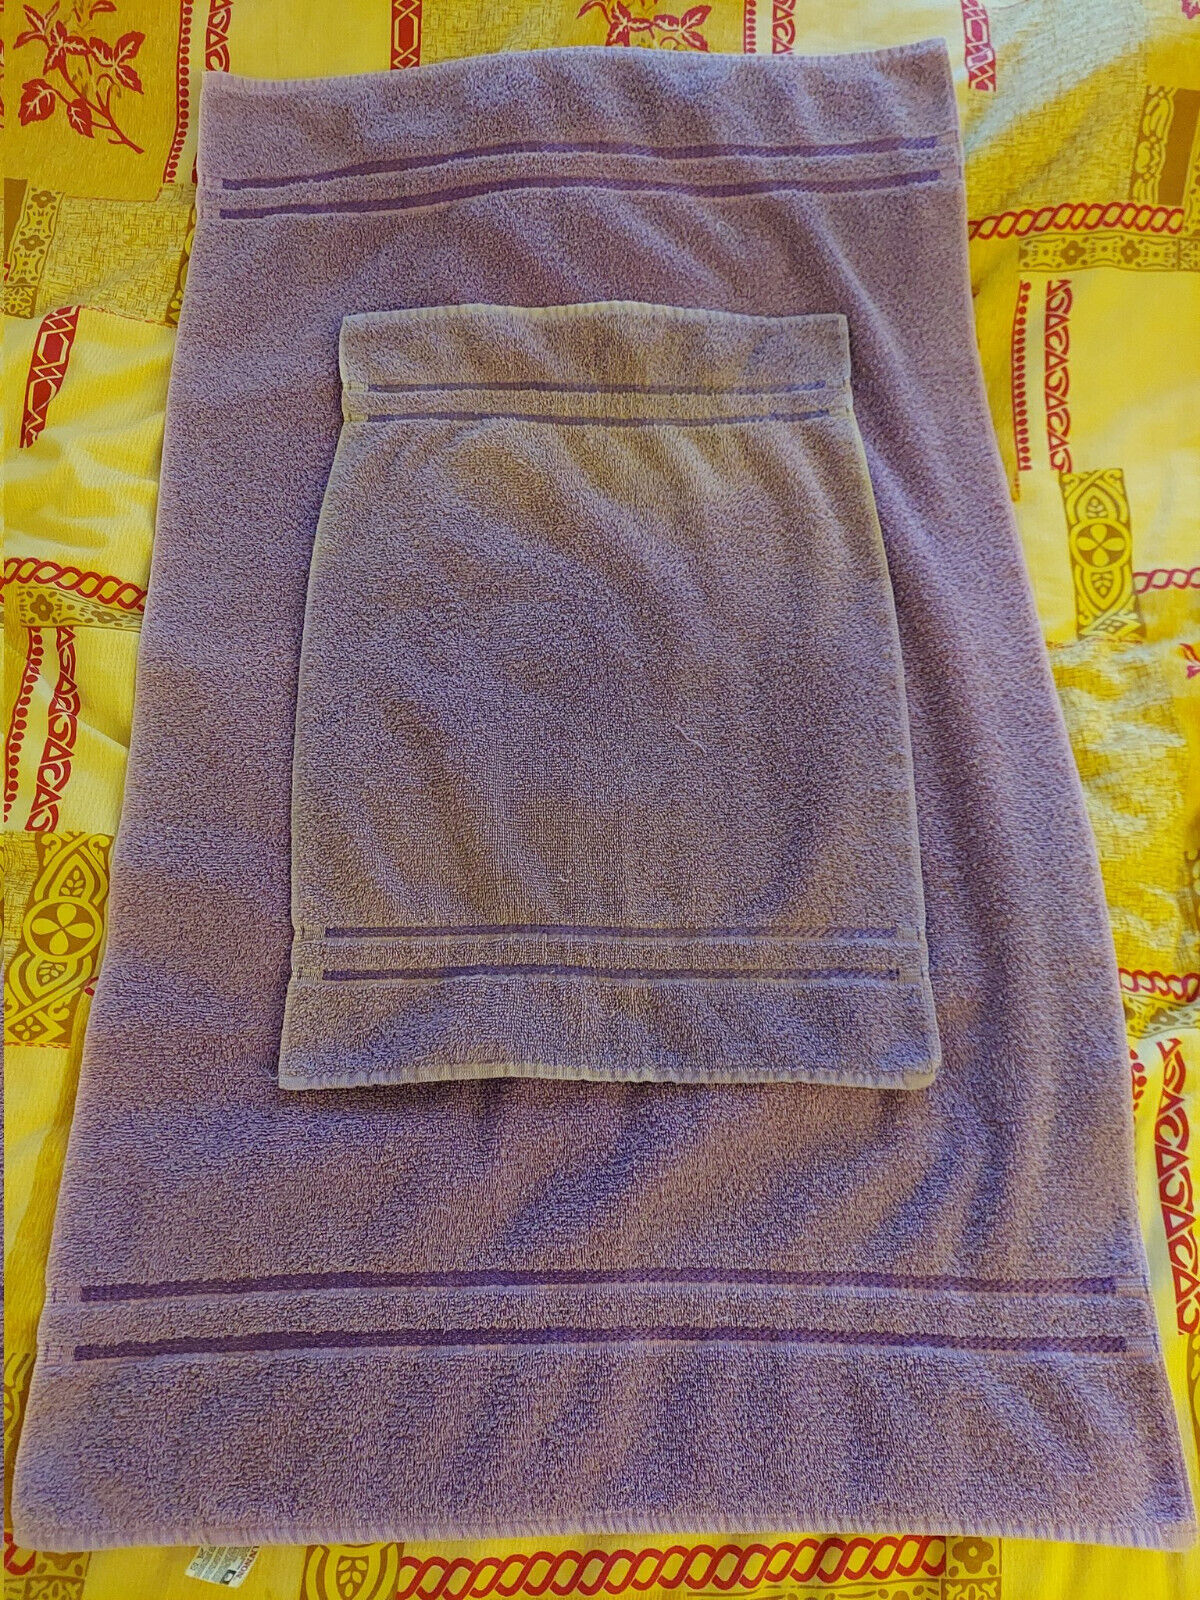 Set of 2 Purple Cannon Towels Bath Hand Washcloth Made in the USA 40.5\